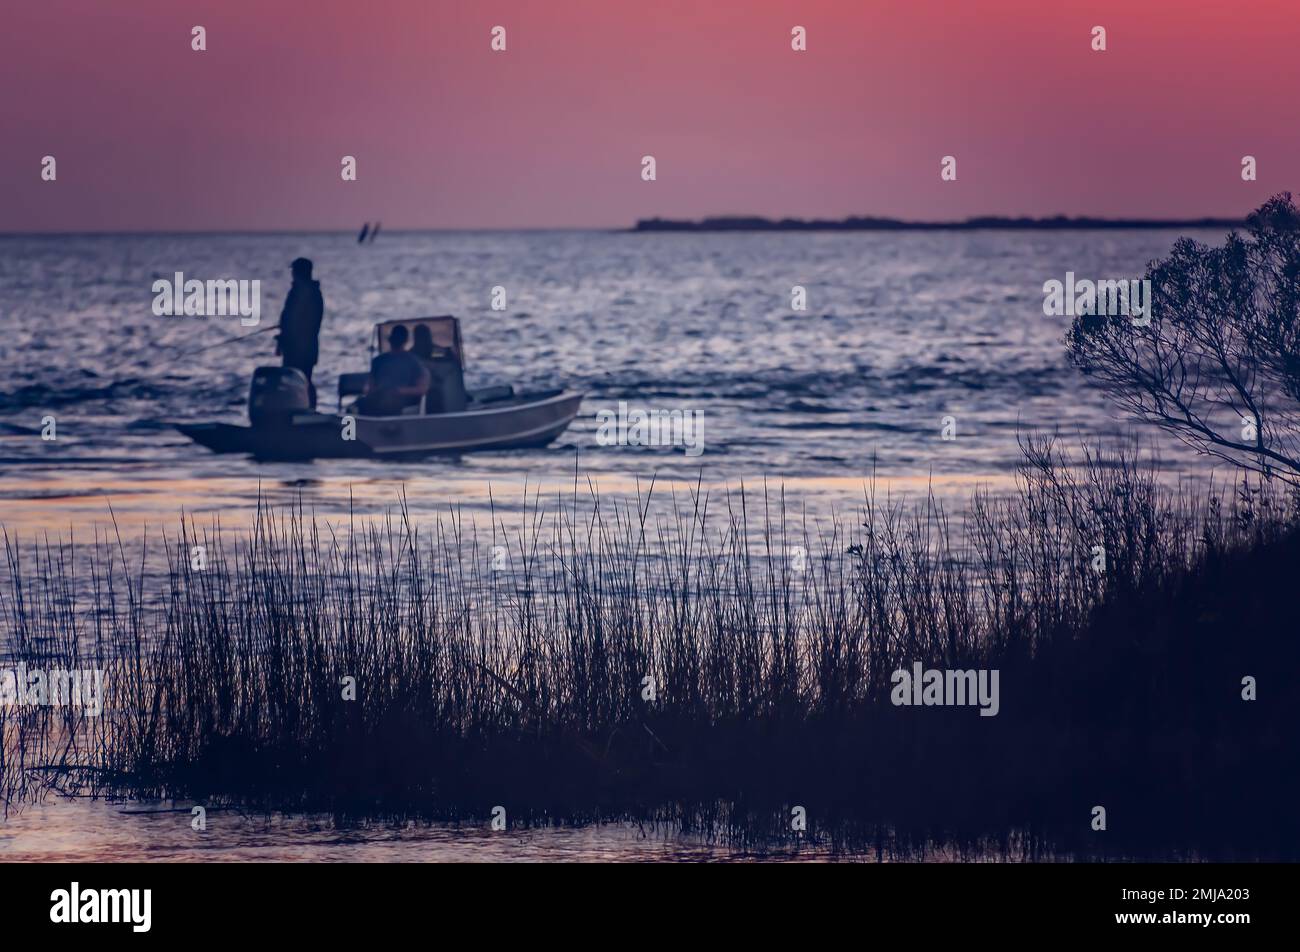 People fish as the sun sets over Heron Bay, Jan. 19, 2023, in Coden, Alabama. The Heron Bay wetlands, managed through the Forever Wild program, consis Stock Photo